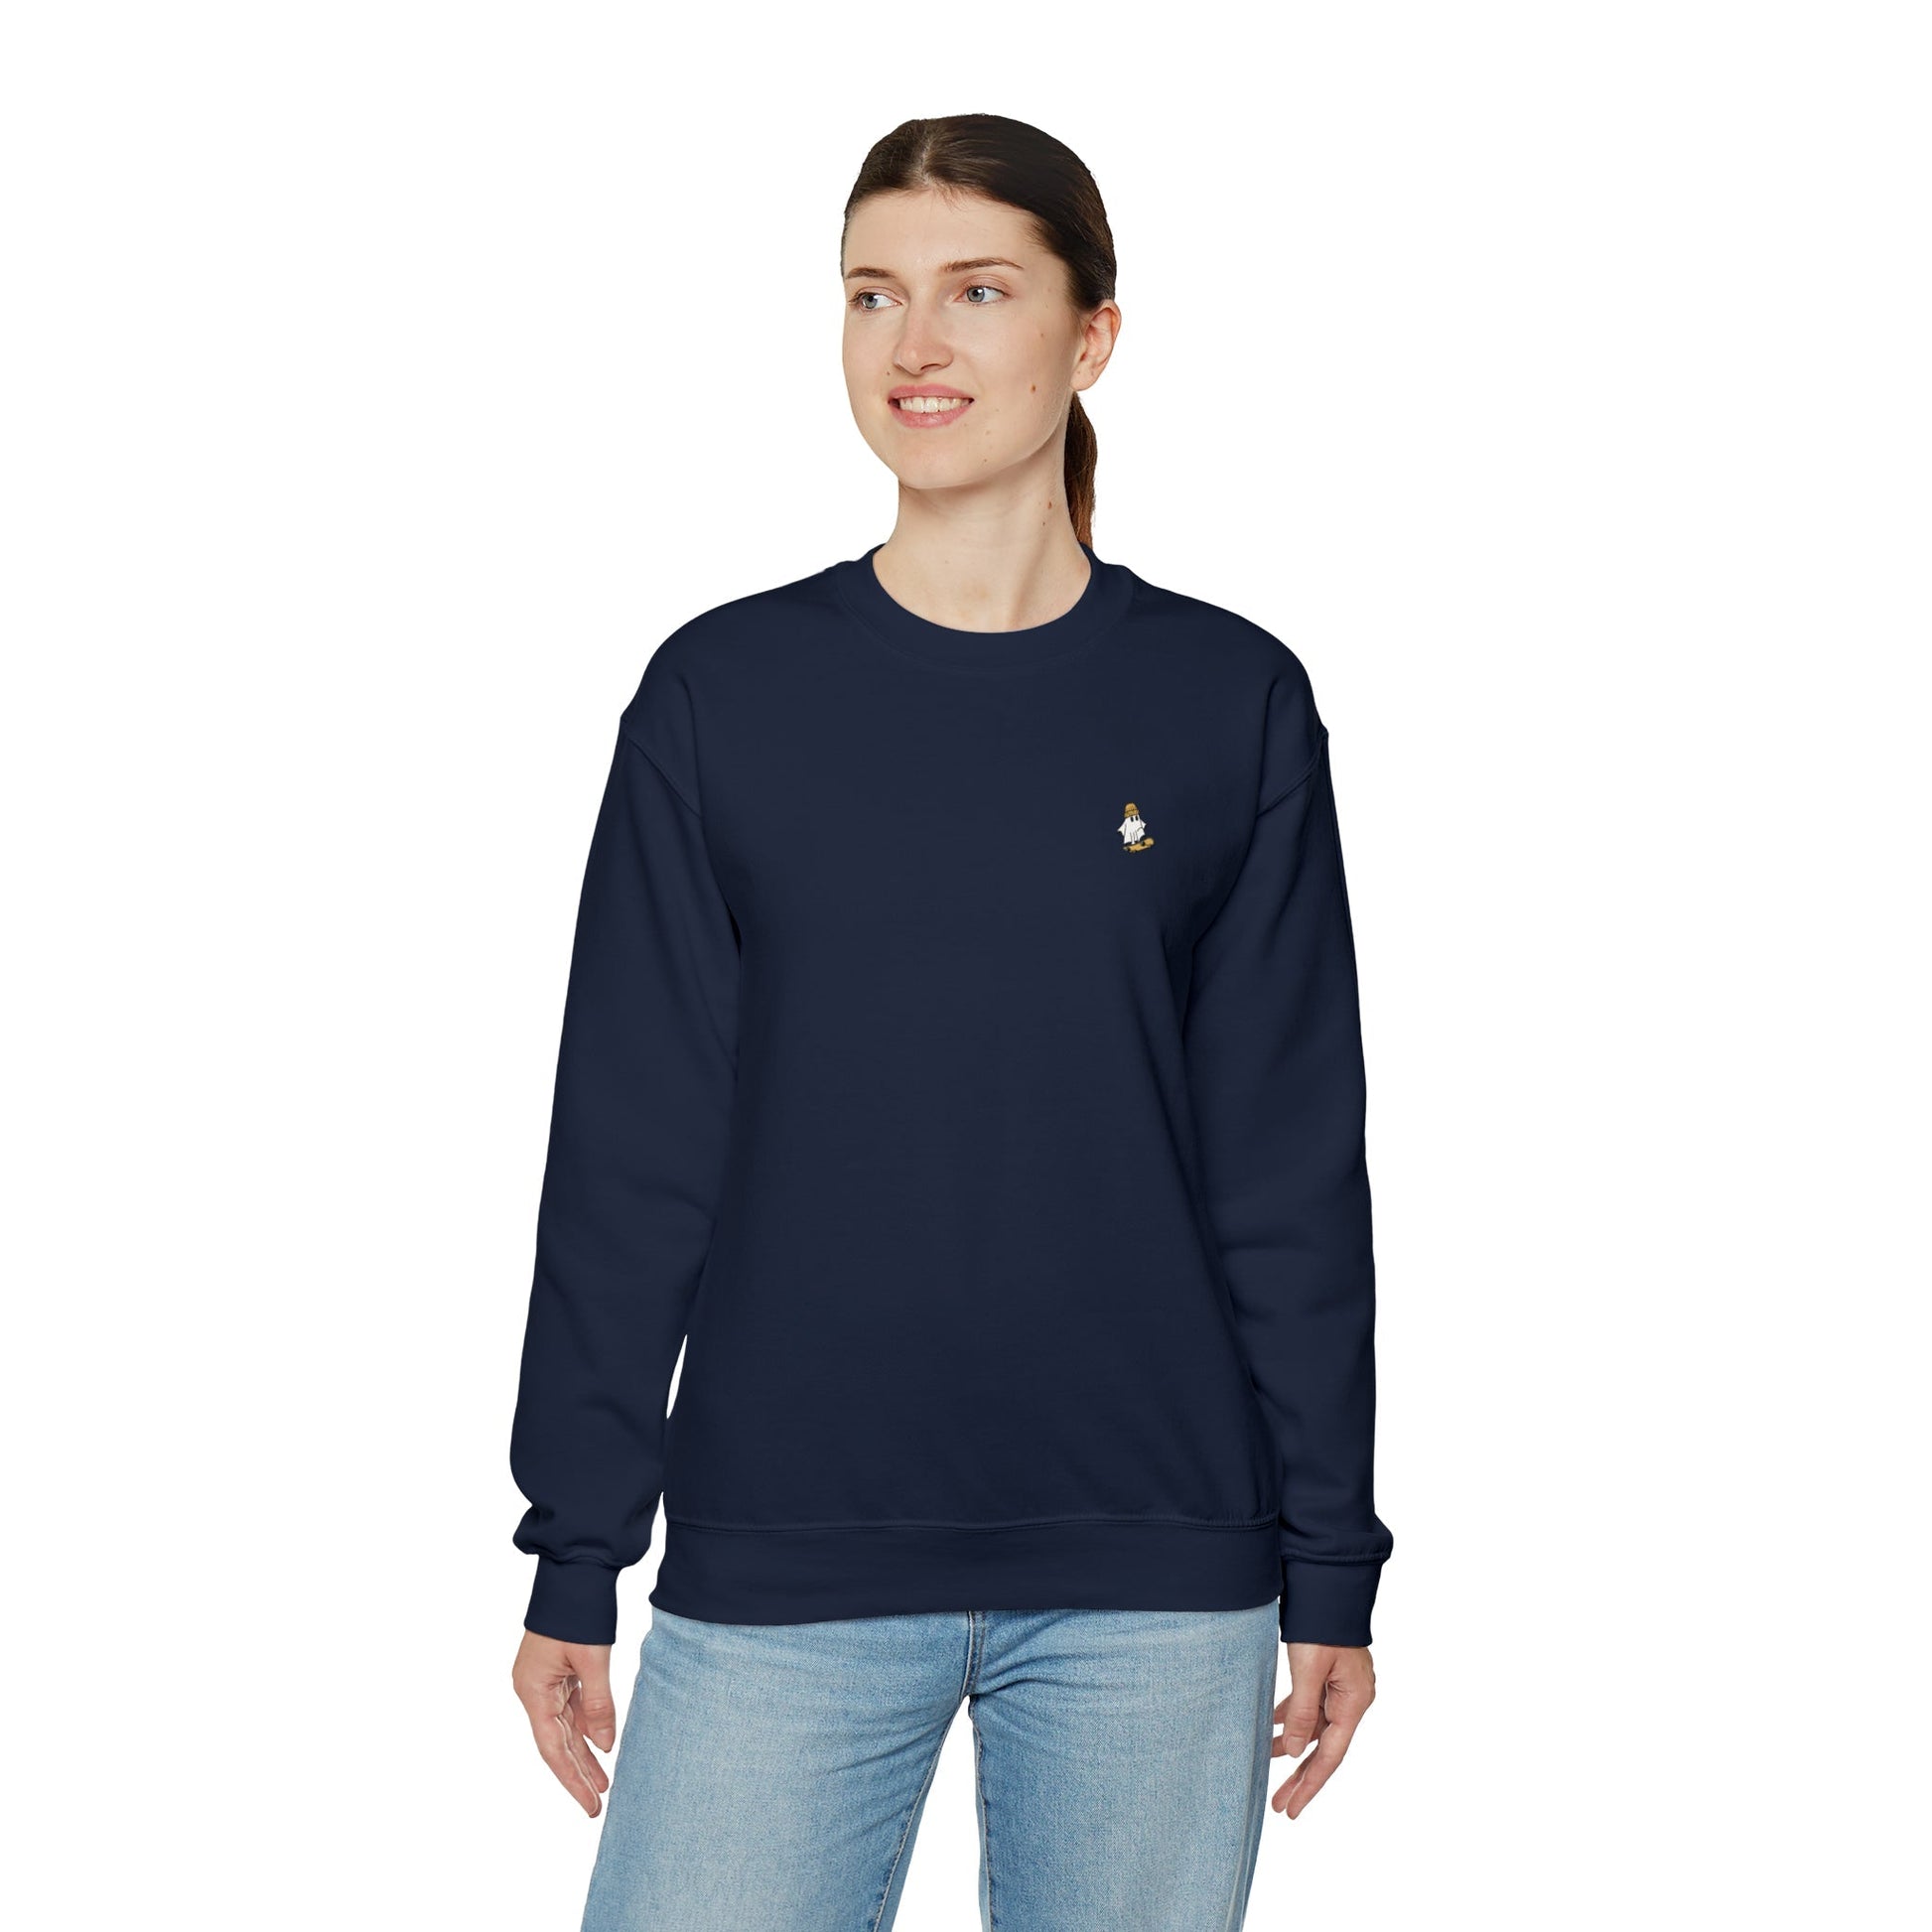 Get trendy with ghost on skateboard  Crewneck Sweatshirt - Sweatshirt available at Good Gift Company. Grab yours for $38 today!